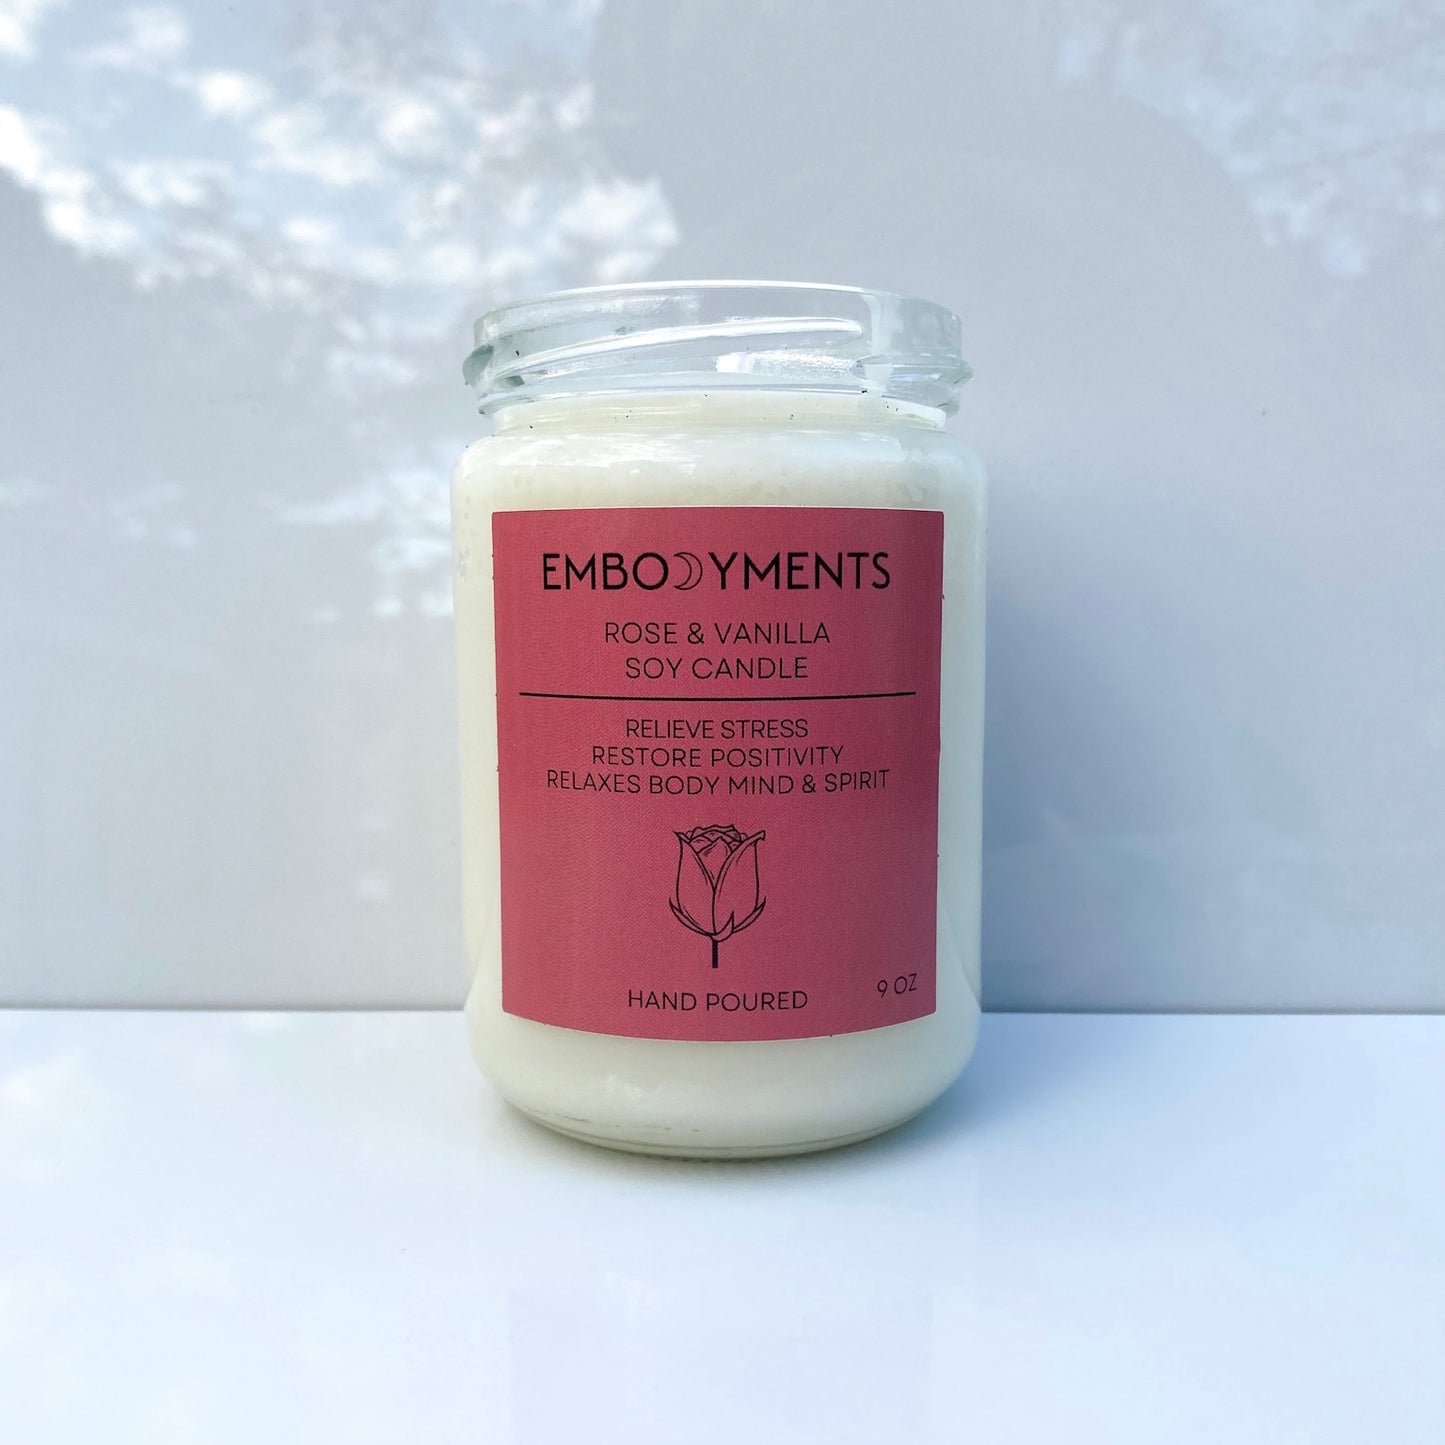 ROSE & VANILLA SOY CANDLE